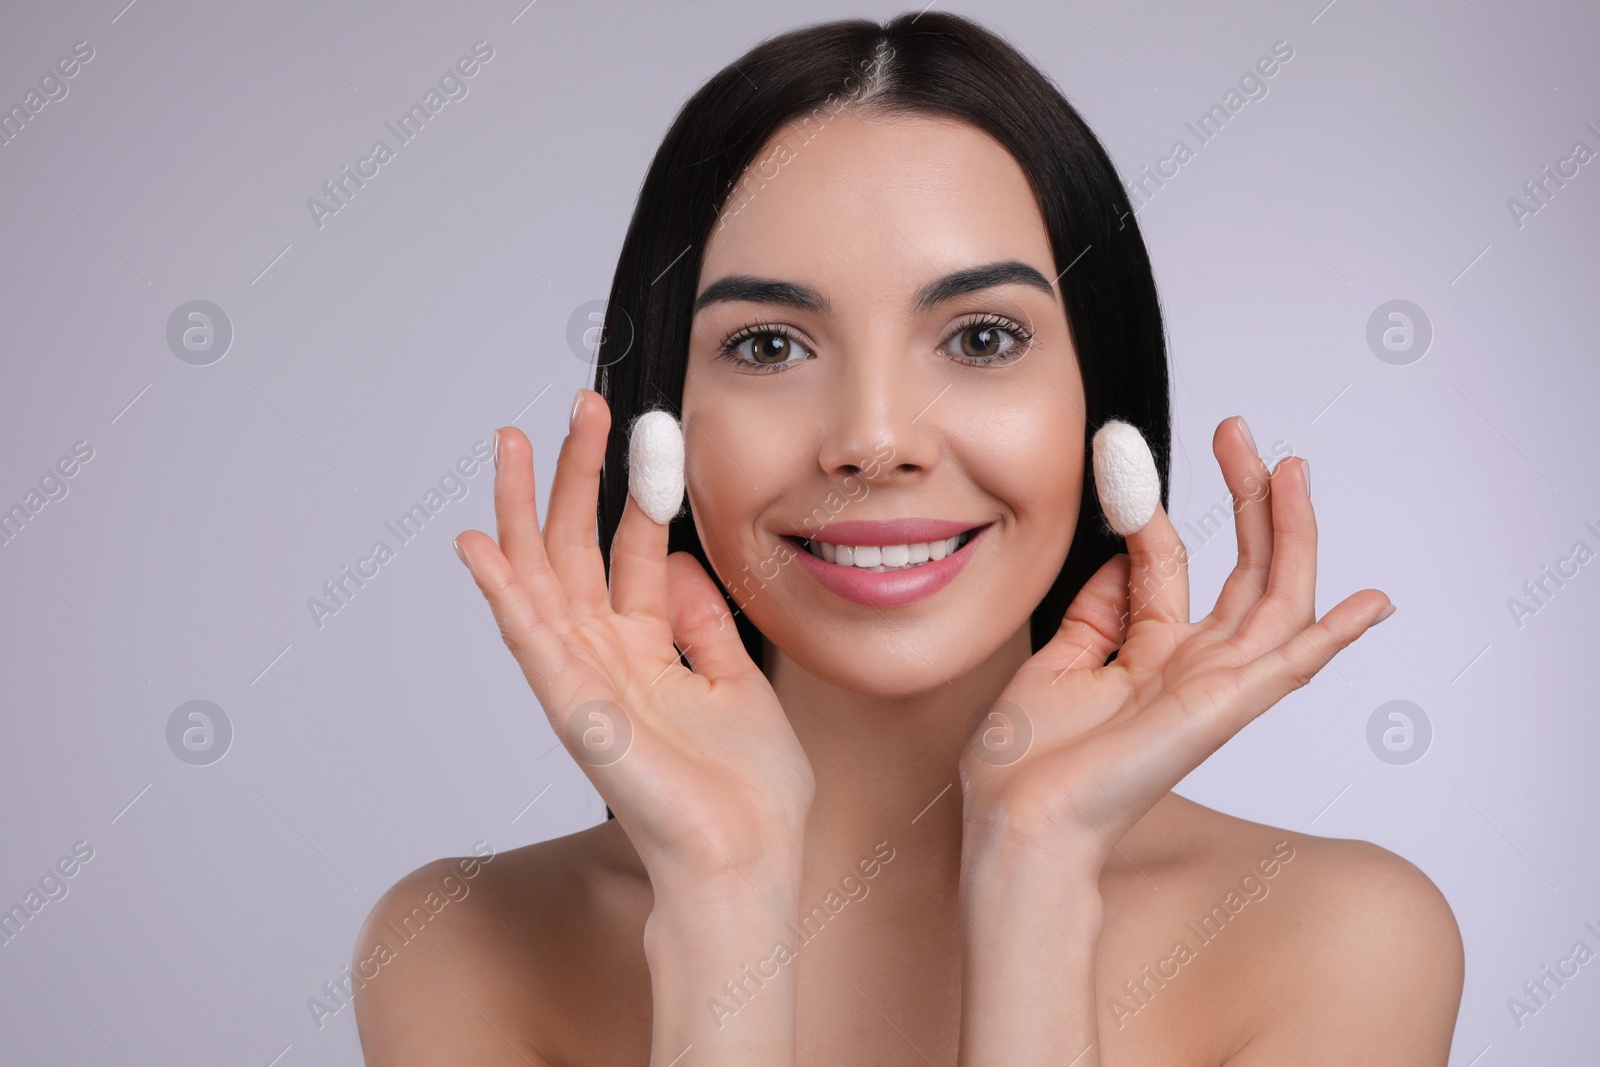 Photo of Woman using silkworm cocoons in skin care routine on light grey background